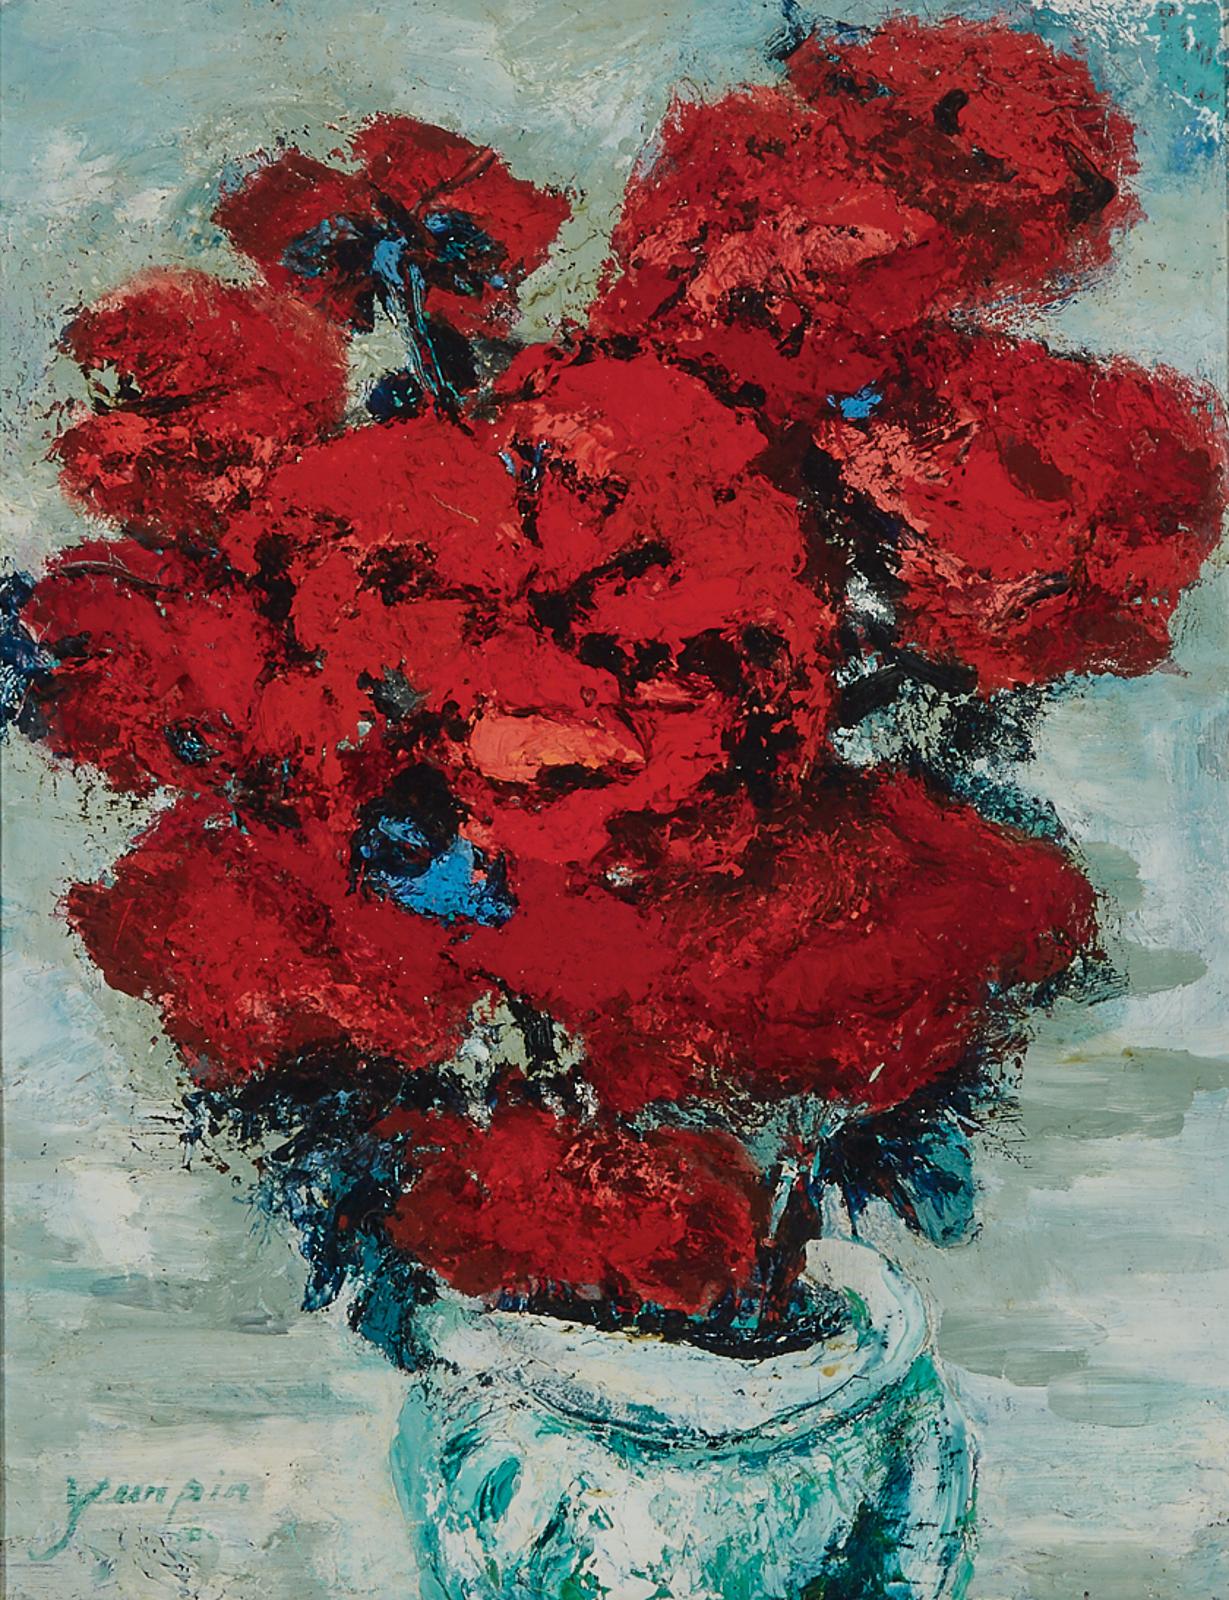 Yuan Pin - Passion (Still Life Of Red Flowers), Summer, 1991